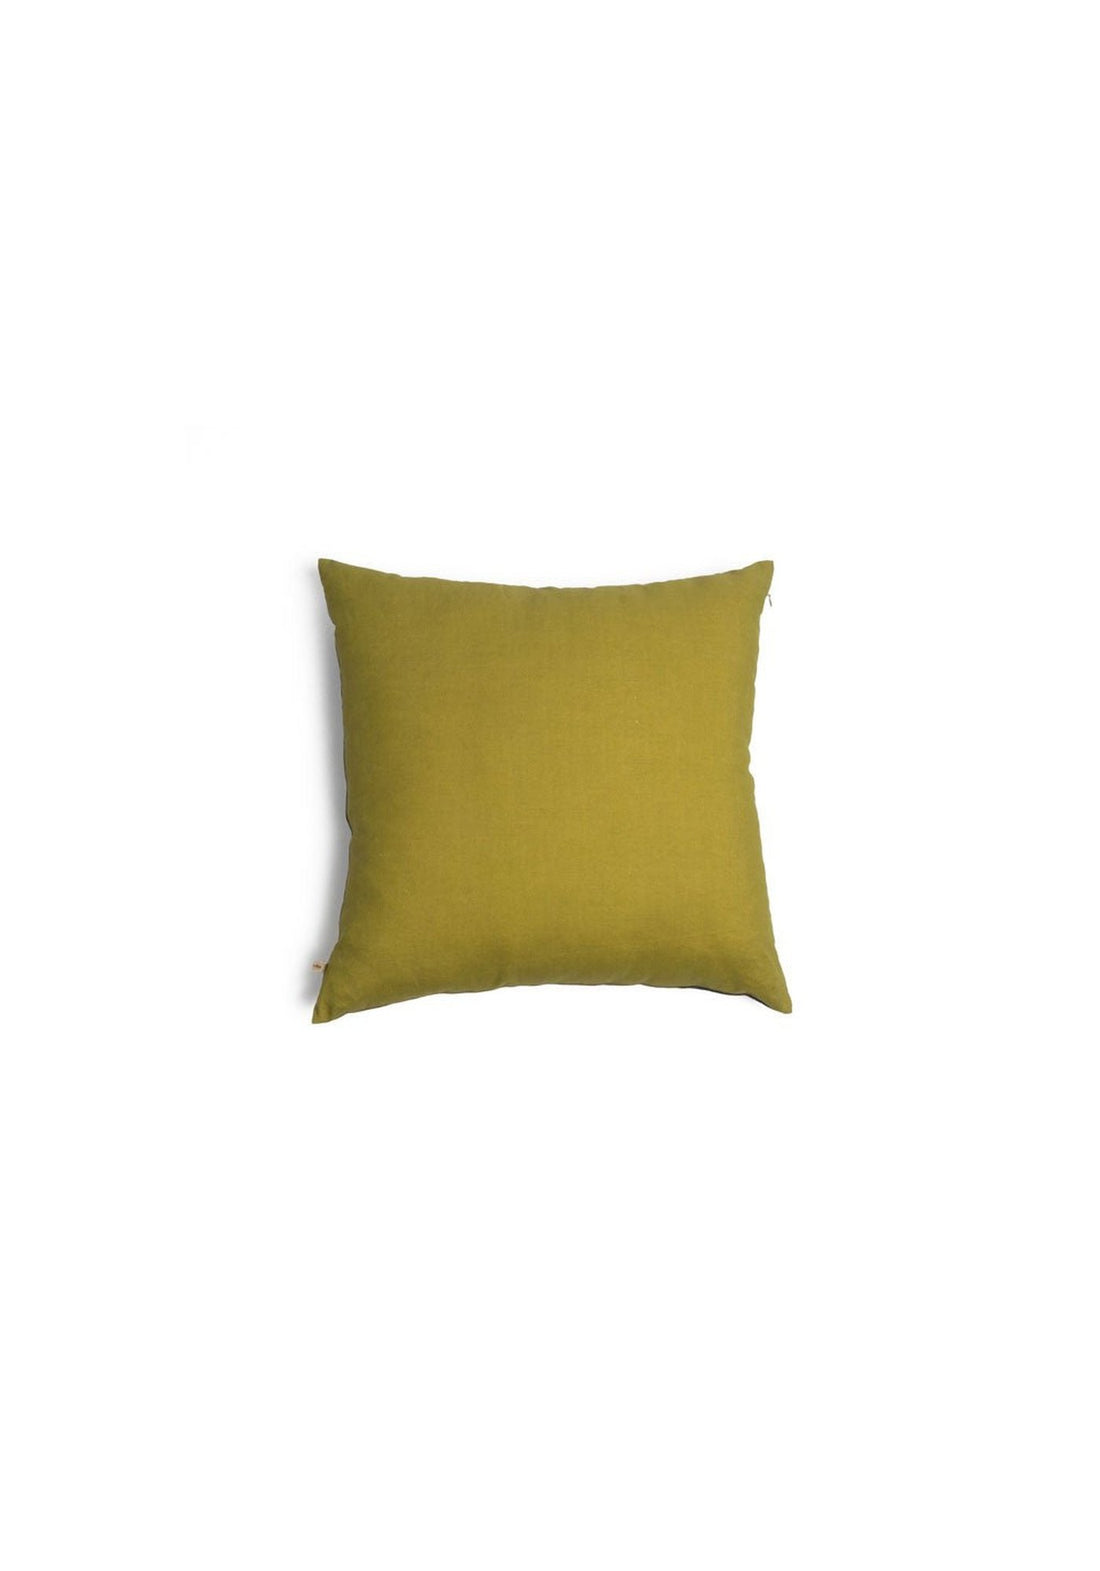 Cushion Cover Square Flowers - Traces of Me